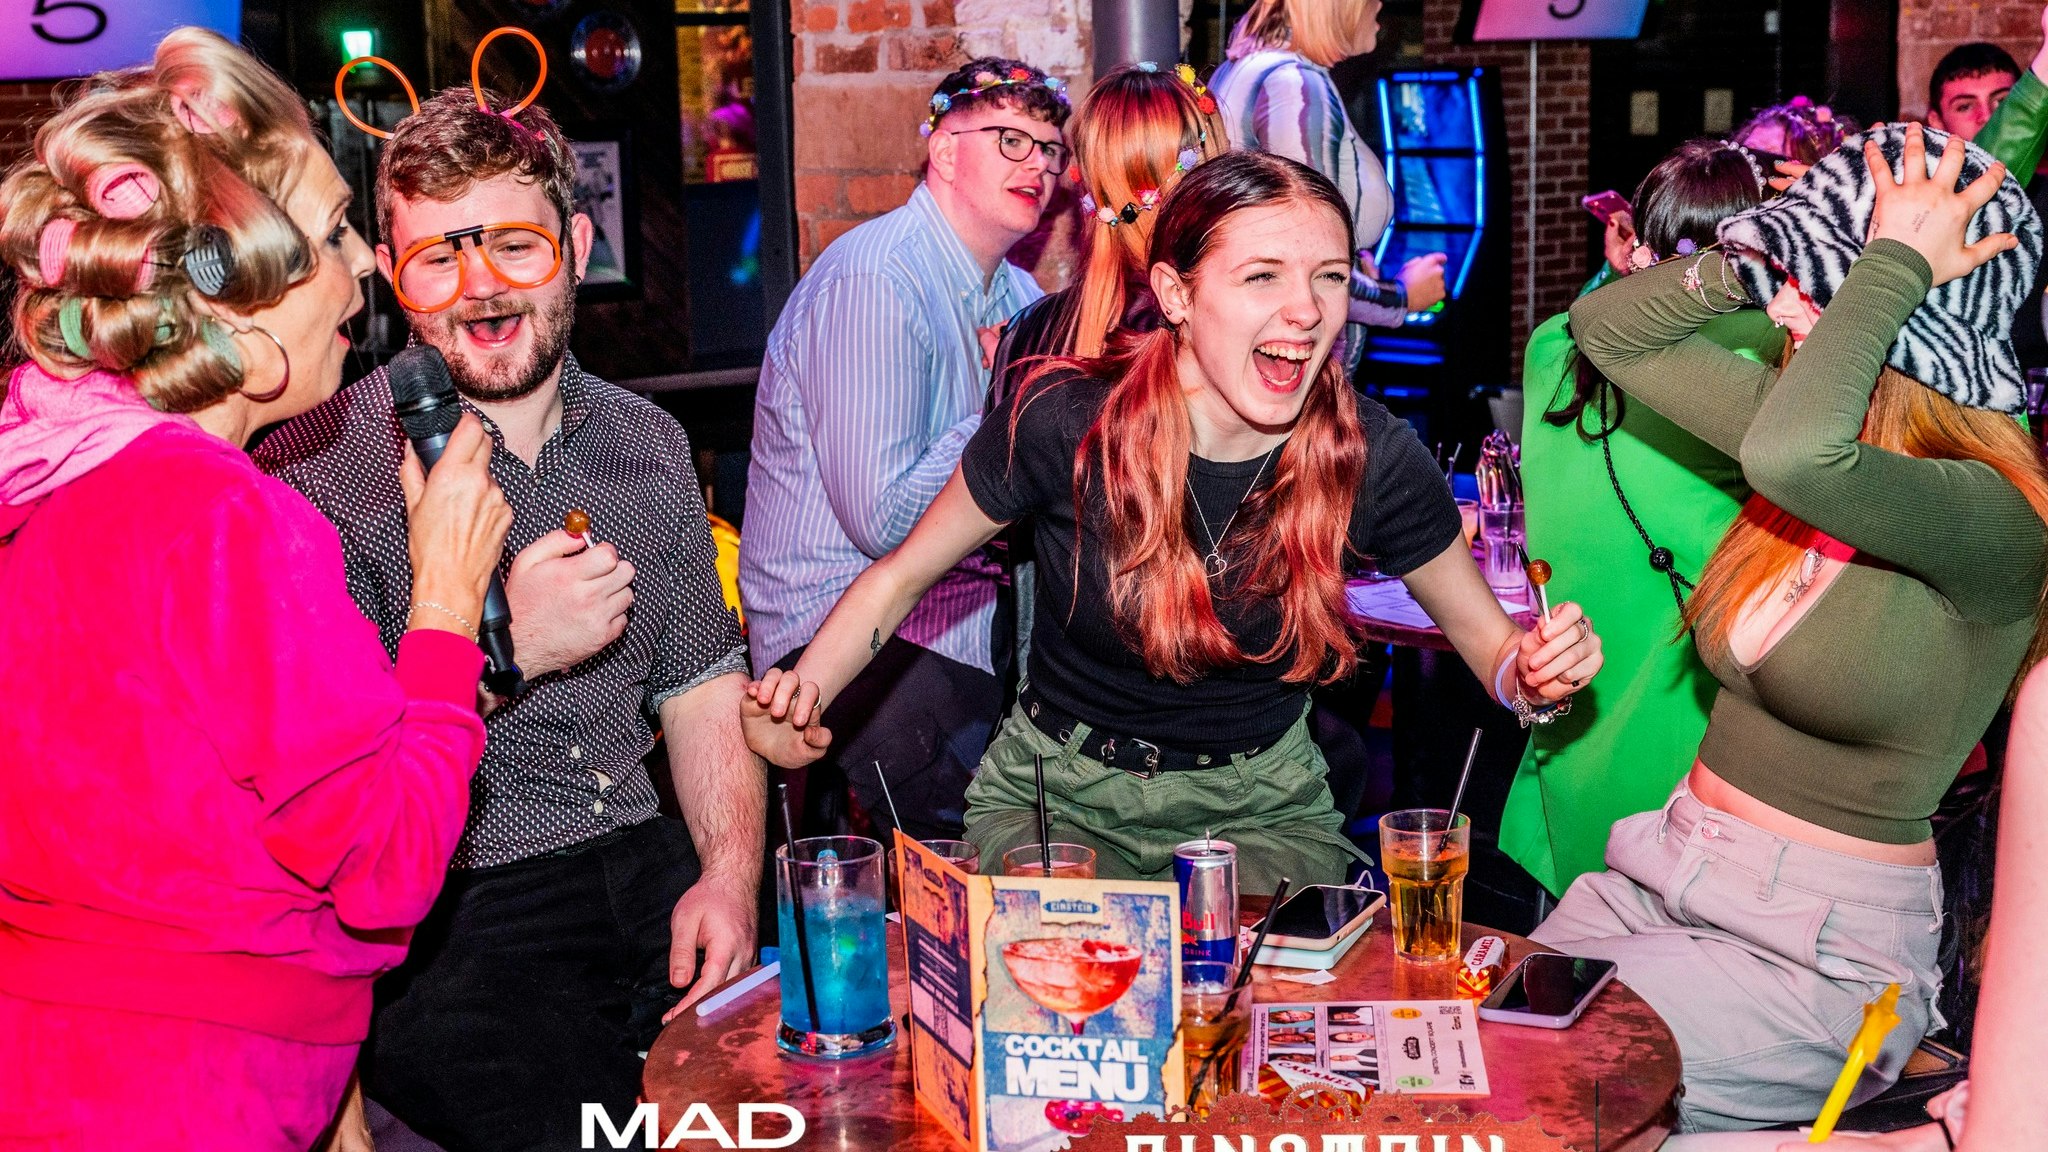 £1 MAD MONDAYS CHRIMBO WARMUP – YA NAN’S FAMOUS MUSIC QUIZ – followed by her HUGE AFTERPARTY –  Liverpool Concert Square’s biggest and cheapest Monday night – Win Cash! £££ PLUS… ANOTHER HARRY STYLES CUTOUTS TO WIN!